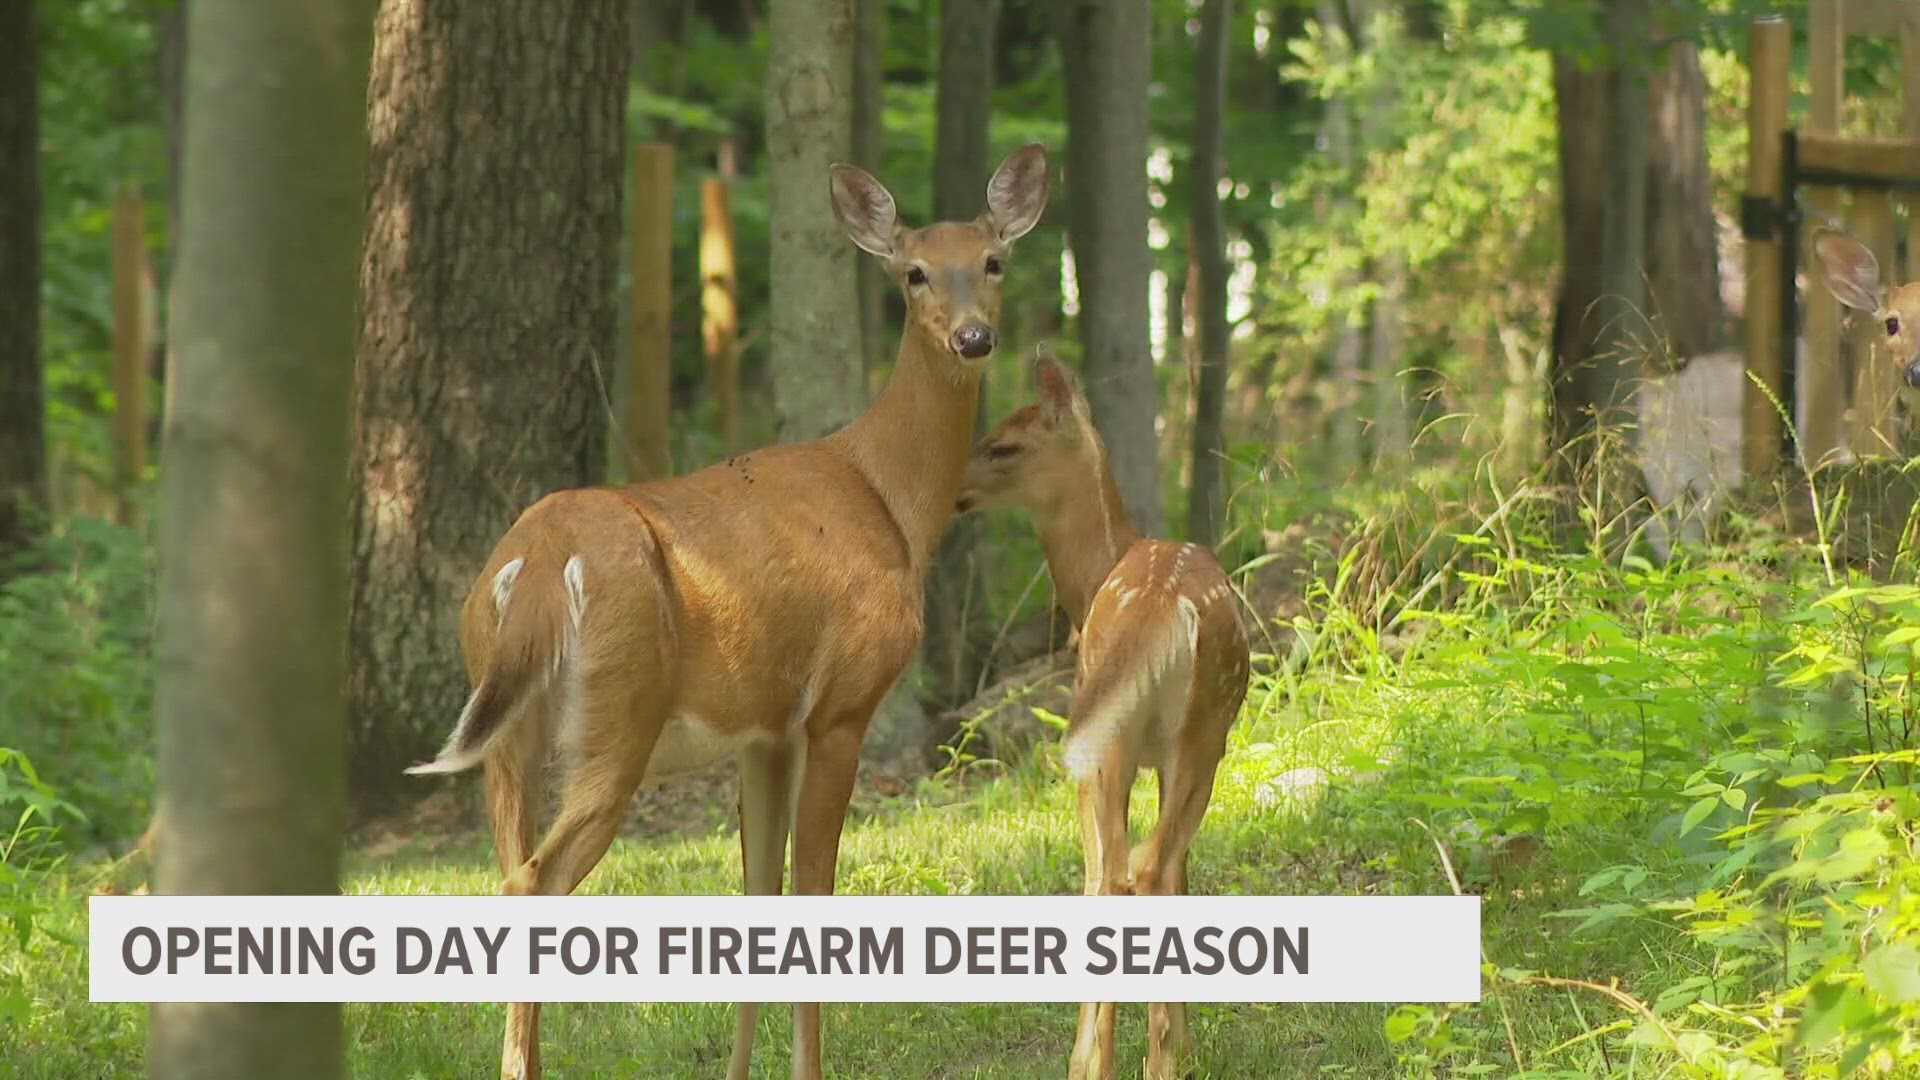 The Michigan Department of Natural Resources said bow hunters harvested more than 83,000 deer.